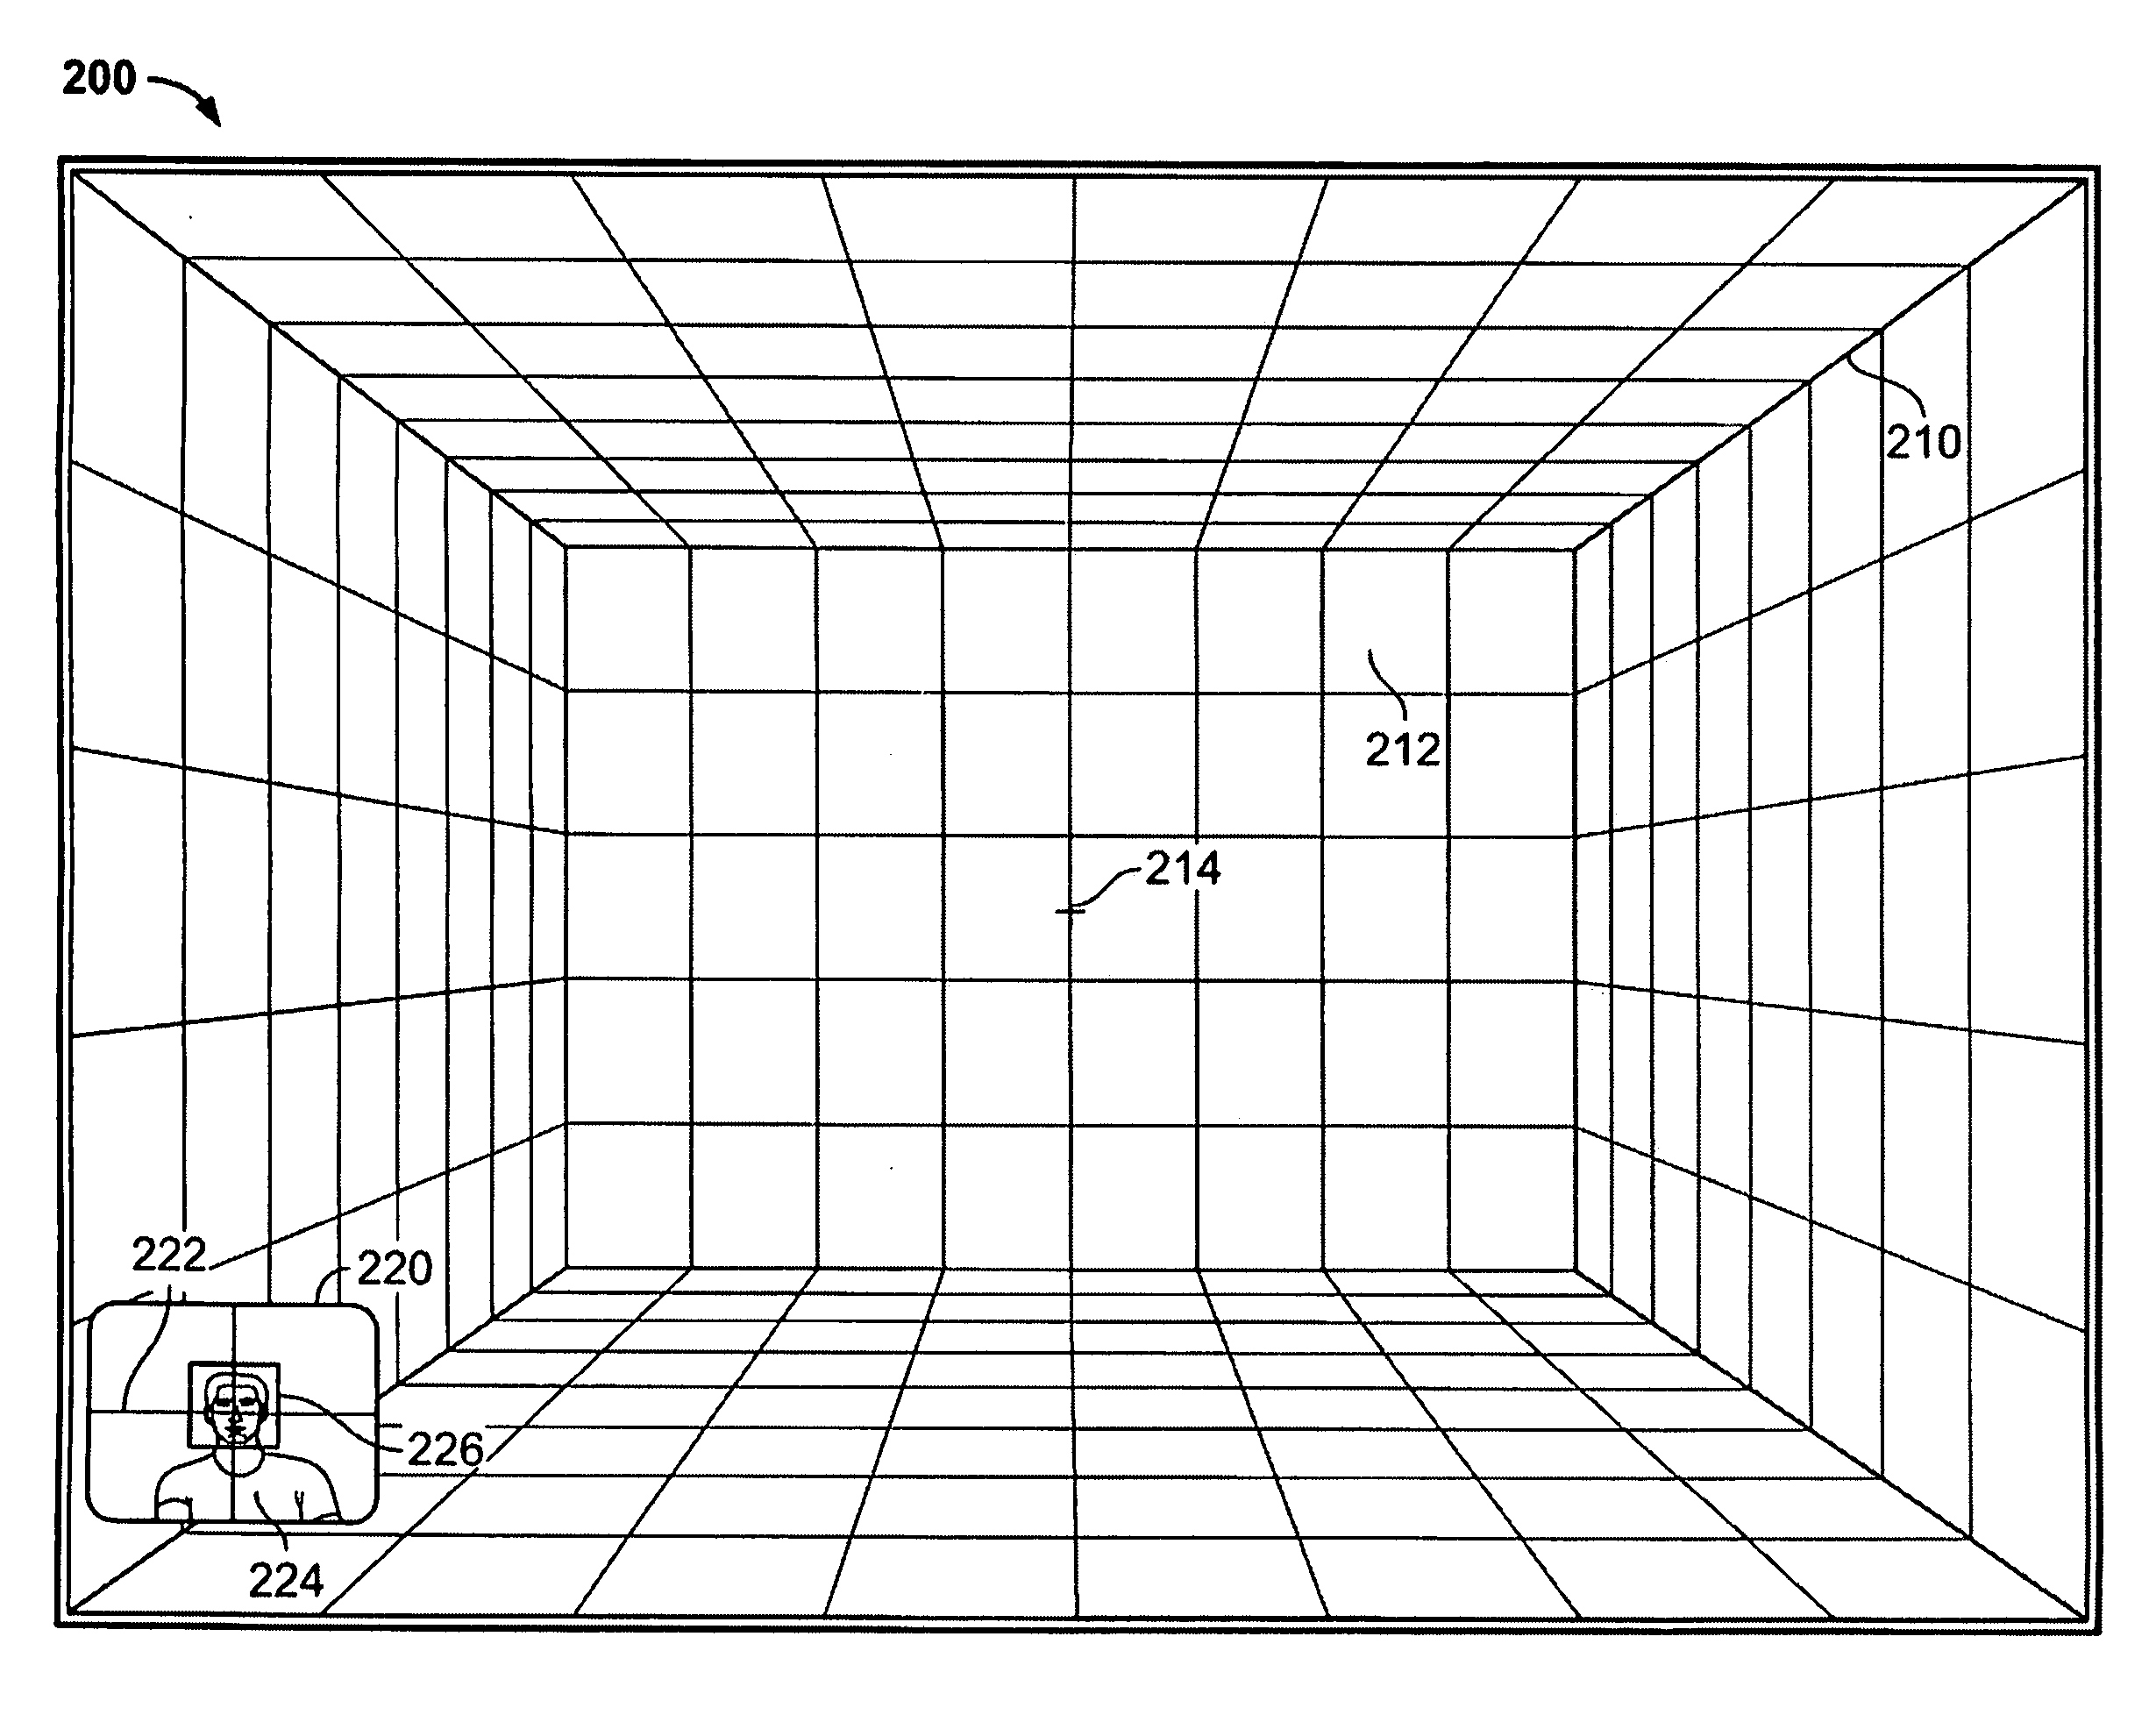 Systems and methods for adjusting a display based on the user's position